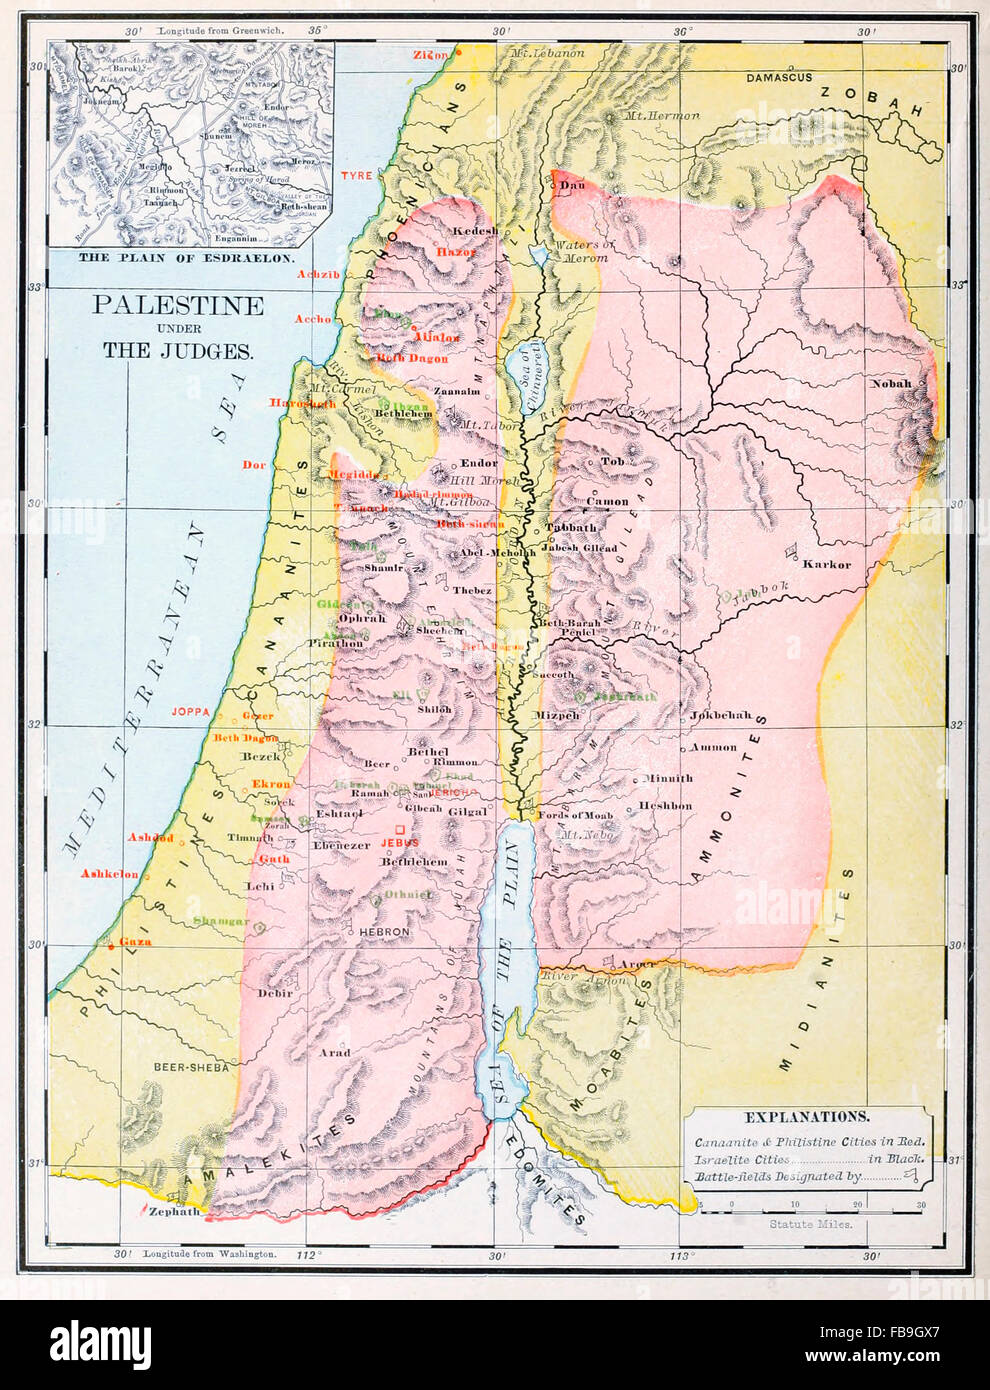 Map of Palestine under the Judges - Old Testament Stock Photo